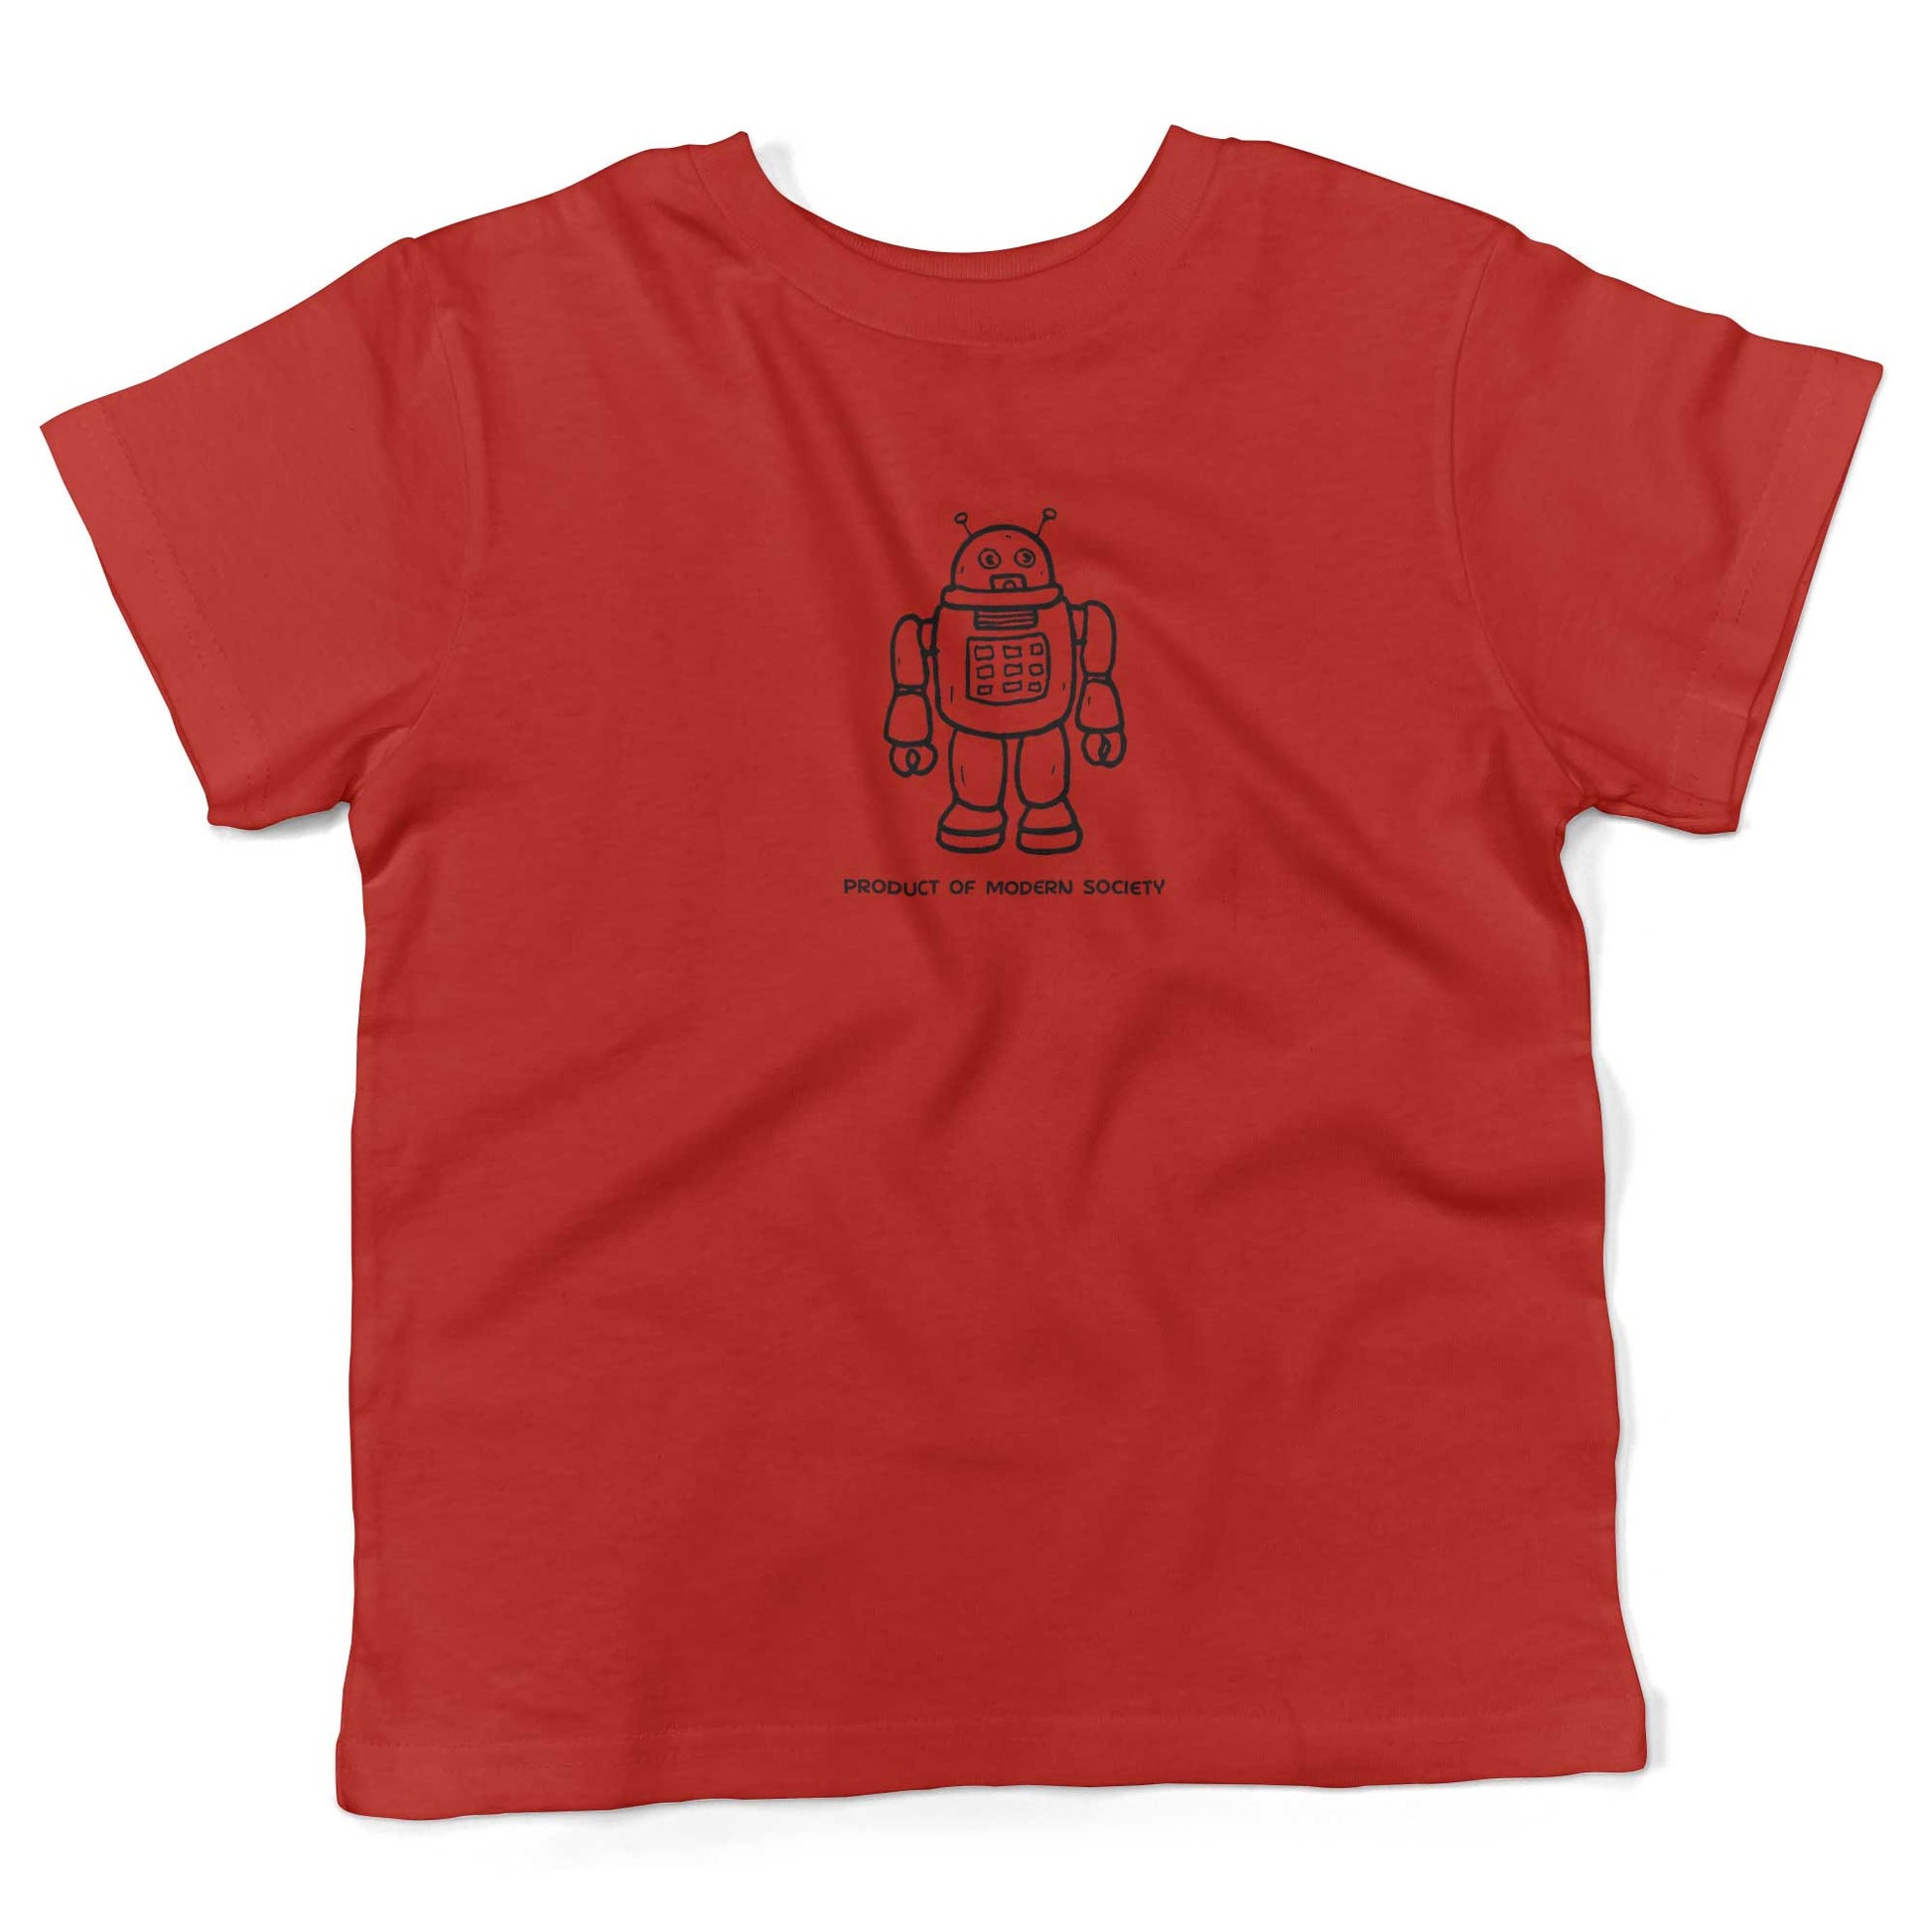 Product Of Modern Society Toddler Shirt-Red-2T